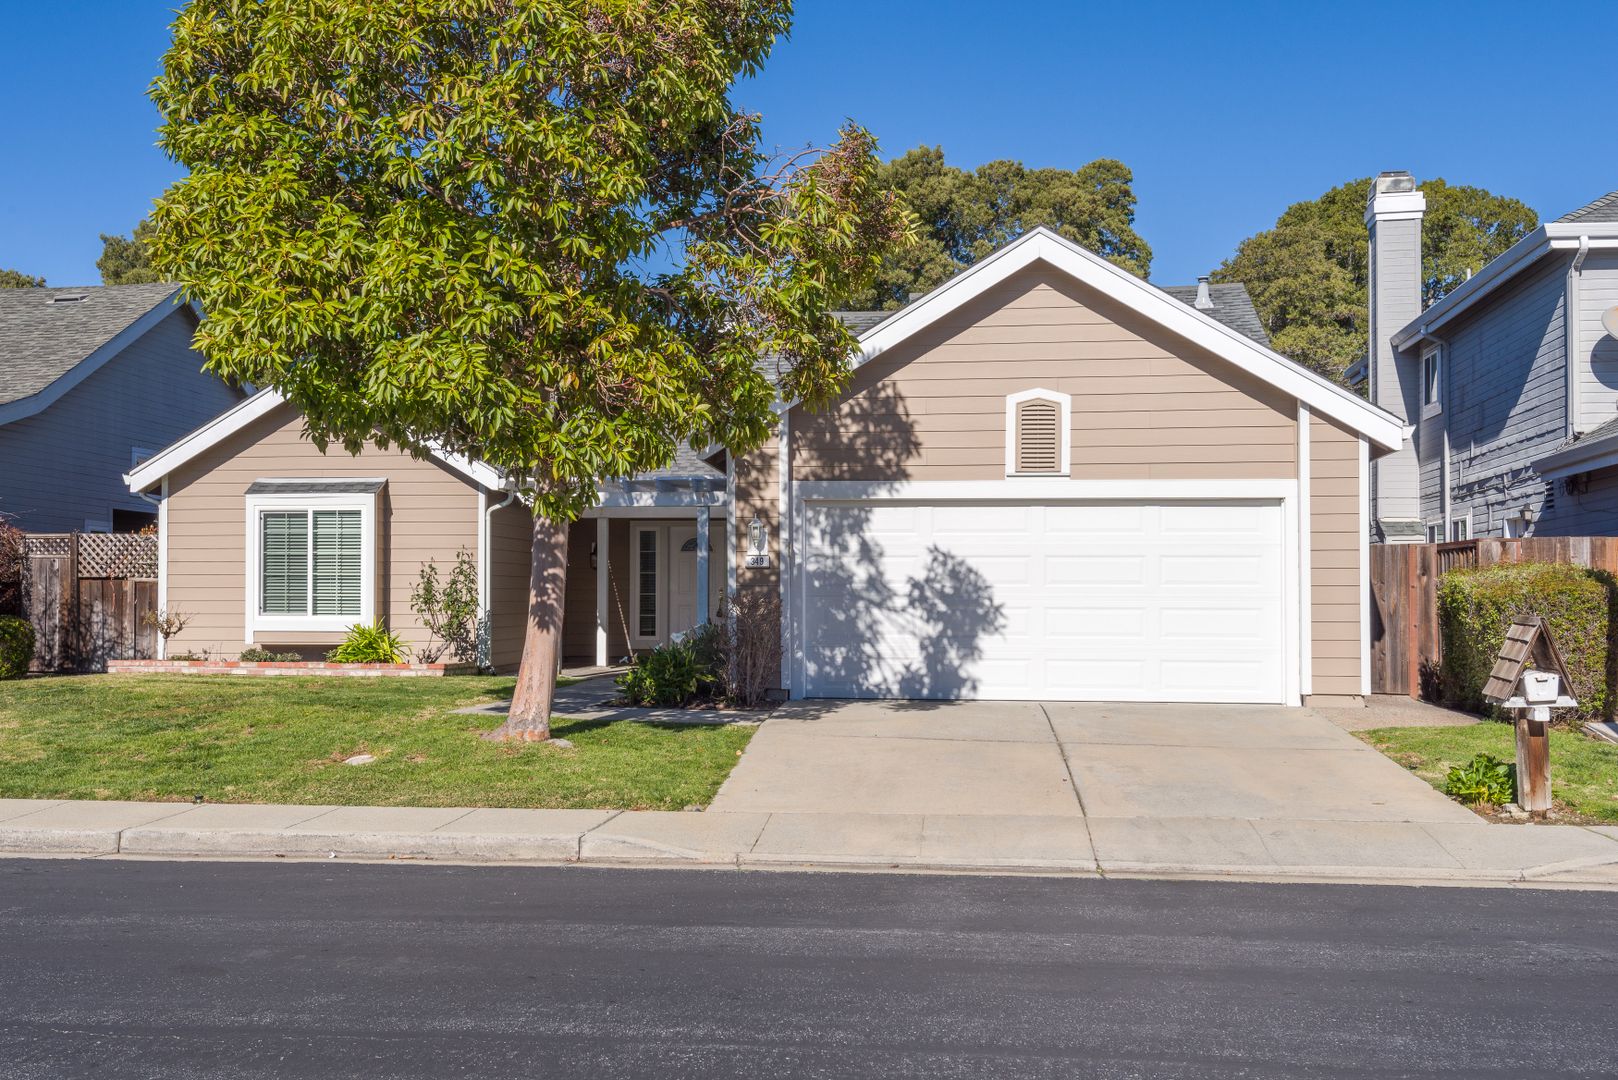 Nice 3Bed/3.5 Bath Home in Alden Crossing located in Foster City